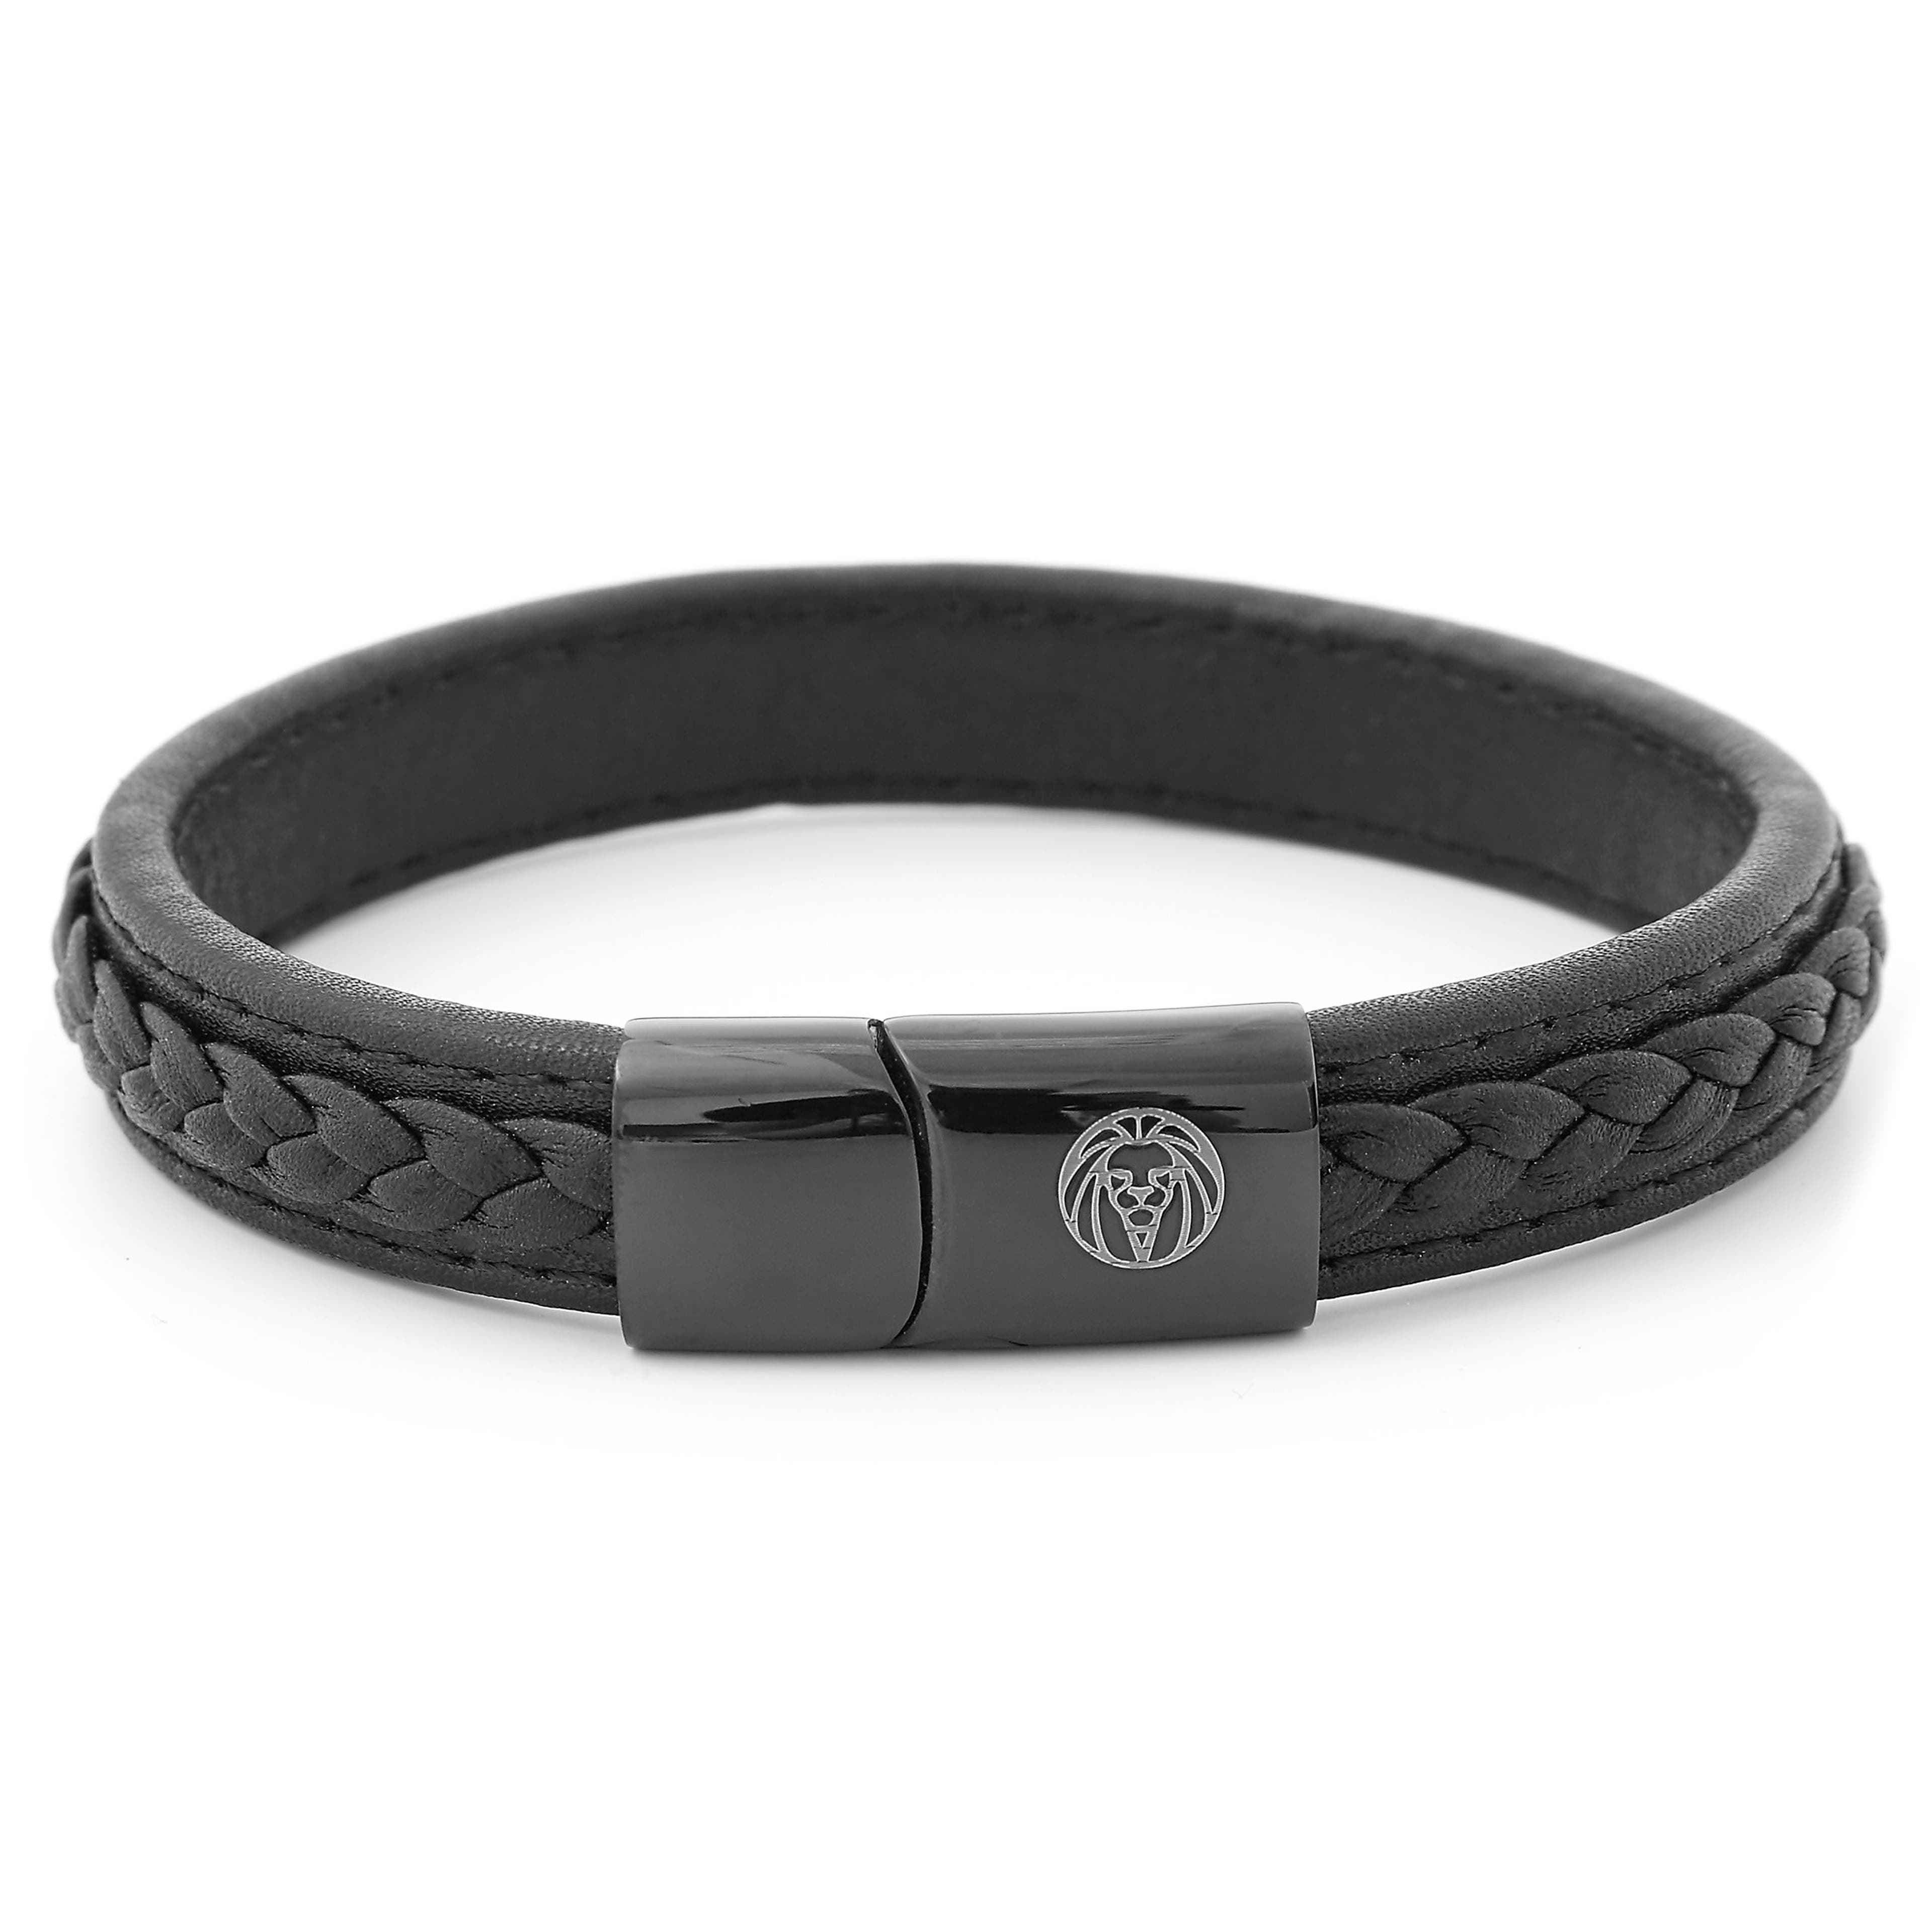 All Black Braided Leather & Stainless Steel Bracelet